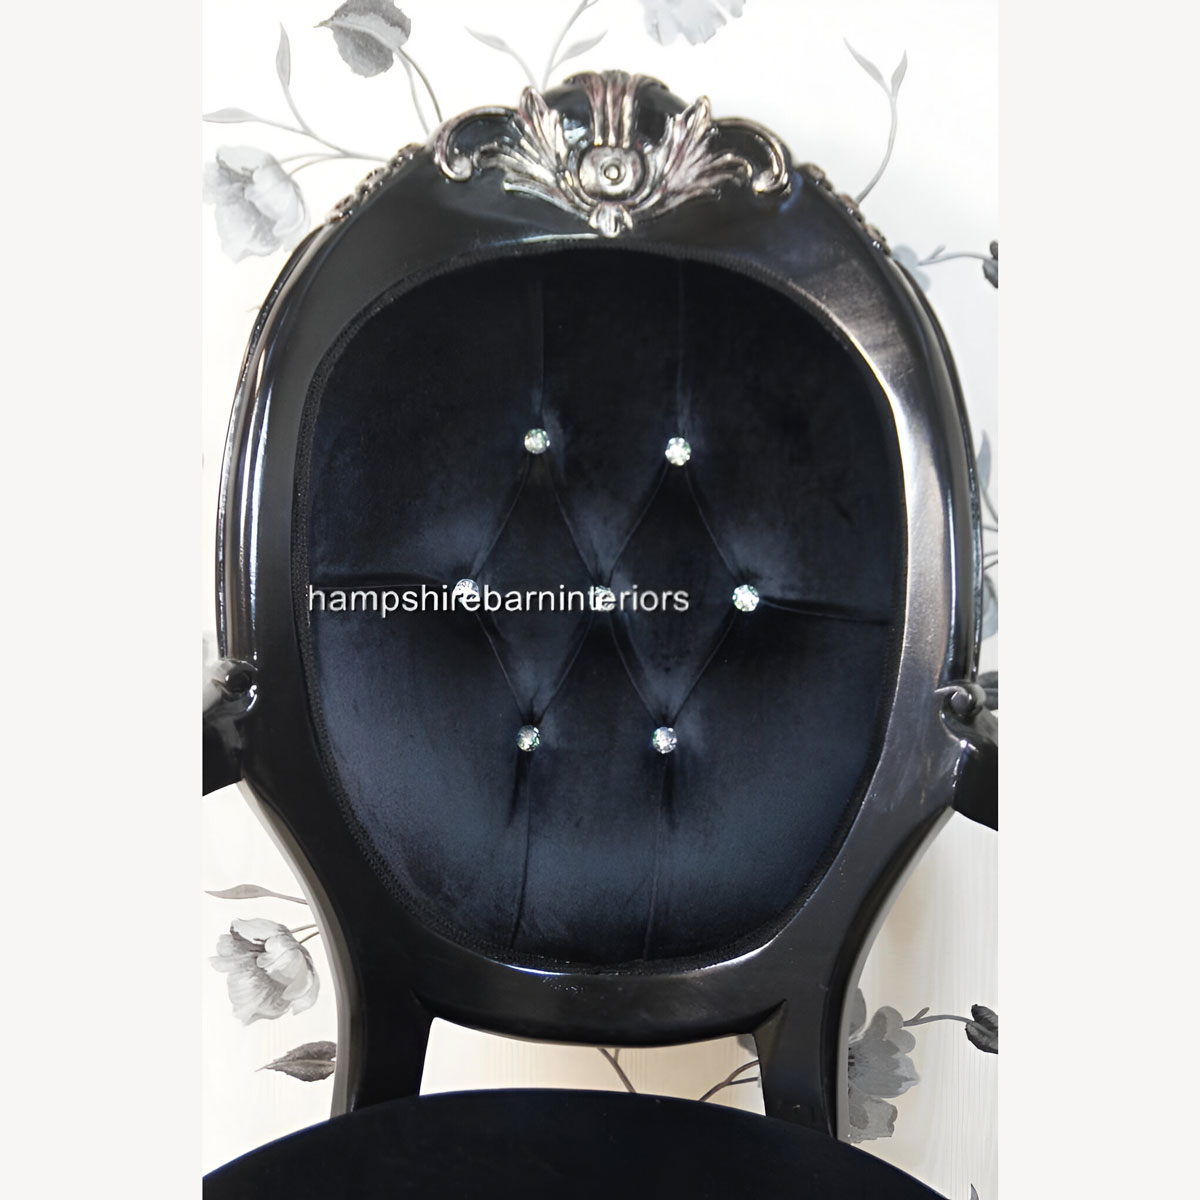 Chatsworth Arm Throne Chair In Silvered Black Finish With Crystal Buttons And Black Velvet 2 - Hampshire Barn Interiors - Chatsworth Arm Throne Chair In Silvered Black Finish With Crystal Buttons And Black Velvet -